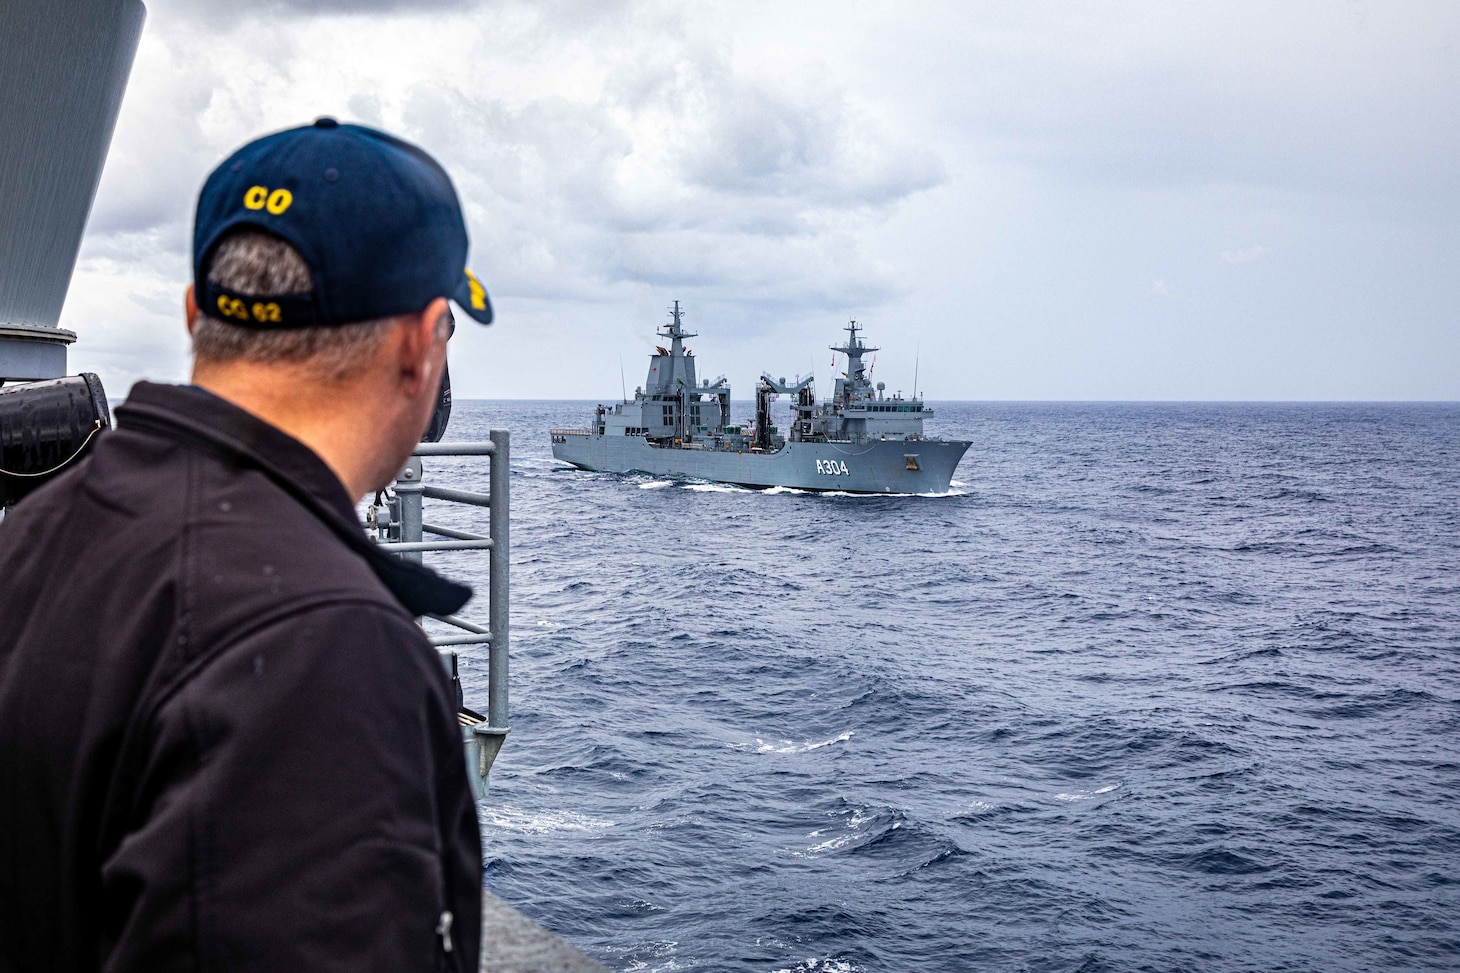 PHILIPPINE SEA (Nov. 20, 2022) Capt. Edward Angelinas views the Royal Australian Navy HMAS Stalwart (A304) on the bridge wing aboard Ticonderoga-class guided-missile cruiser USS Chancellorsville (CG 62) as Carrier Strike Group (CSG) 5 units conduct tri-lateral operations with JS Setogiri (DD 156) of the Japan Maritime Self-Defense Force (JMSDF) and the Royal Australian Navy, to focus on allied interoperability training in the areas of sustainment capability and high end warfighting in the Philippine Sea, Nov. 20. Chancellorsville is forward-deployed to the U.S. 7th Fleet in support of security and stability in the Indo-Pacific and is assigned to Commander, Task Force 70, a combat-ready force that protects and defends the collective maritime interest of its allies and partners in the region. (U.S. Navy photo by Mass Communication Specialist 2nd Class Justin Stack)